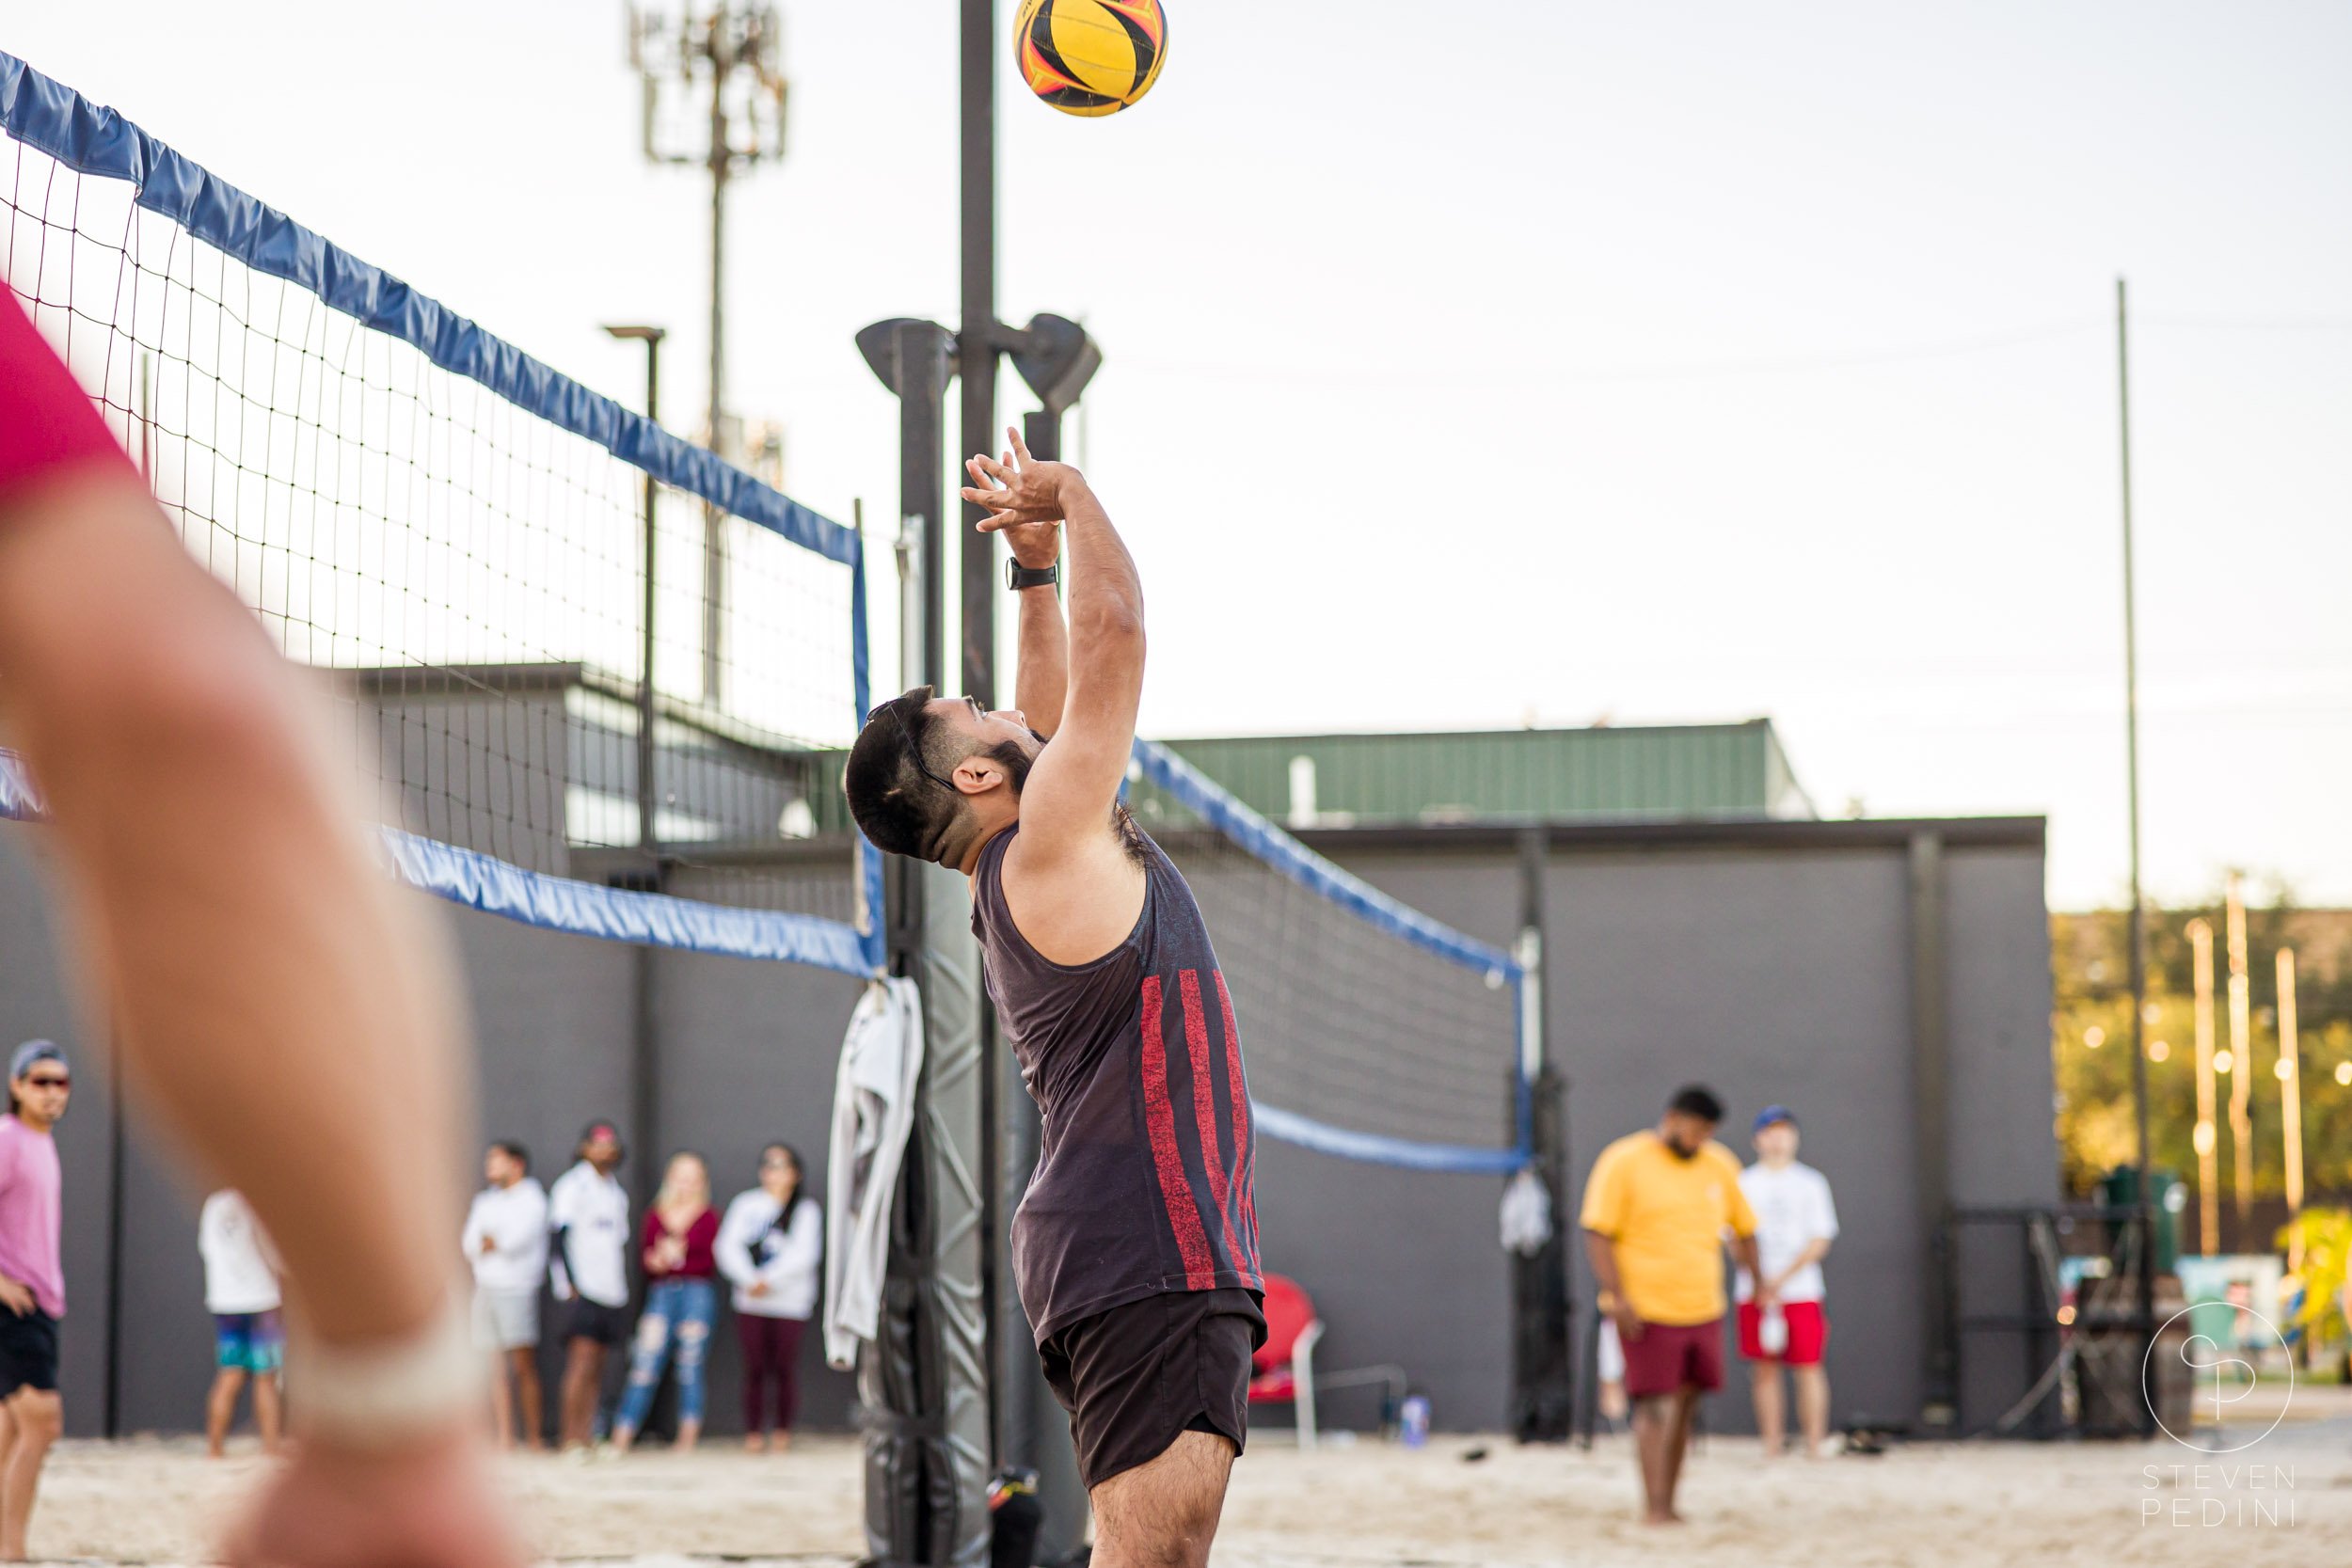 Steven Pedini Photography - Bumpy Pickle - Sand Volleyball - Houston TX - World Cup of Volleyball - 00180.jpg